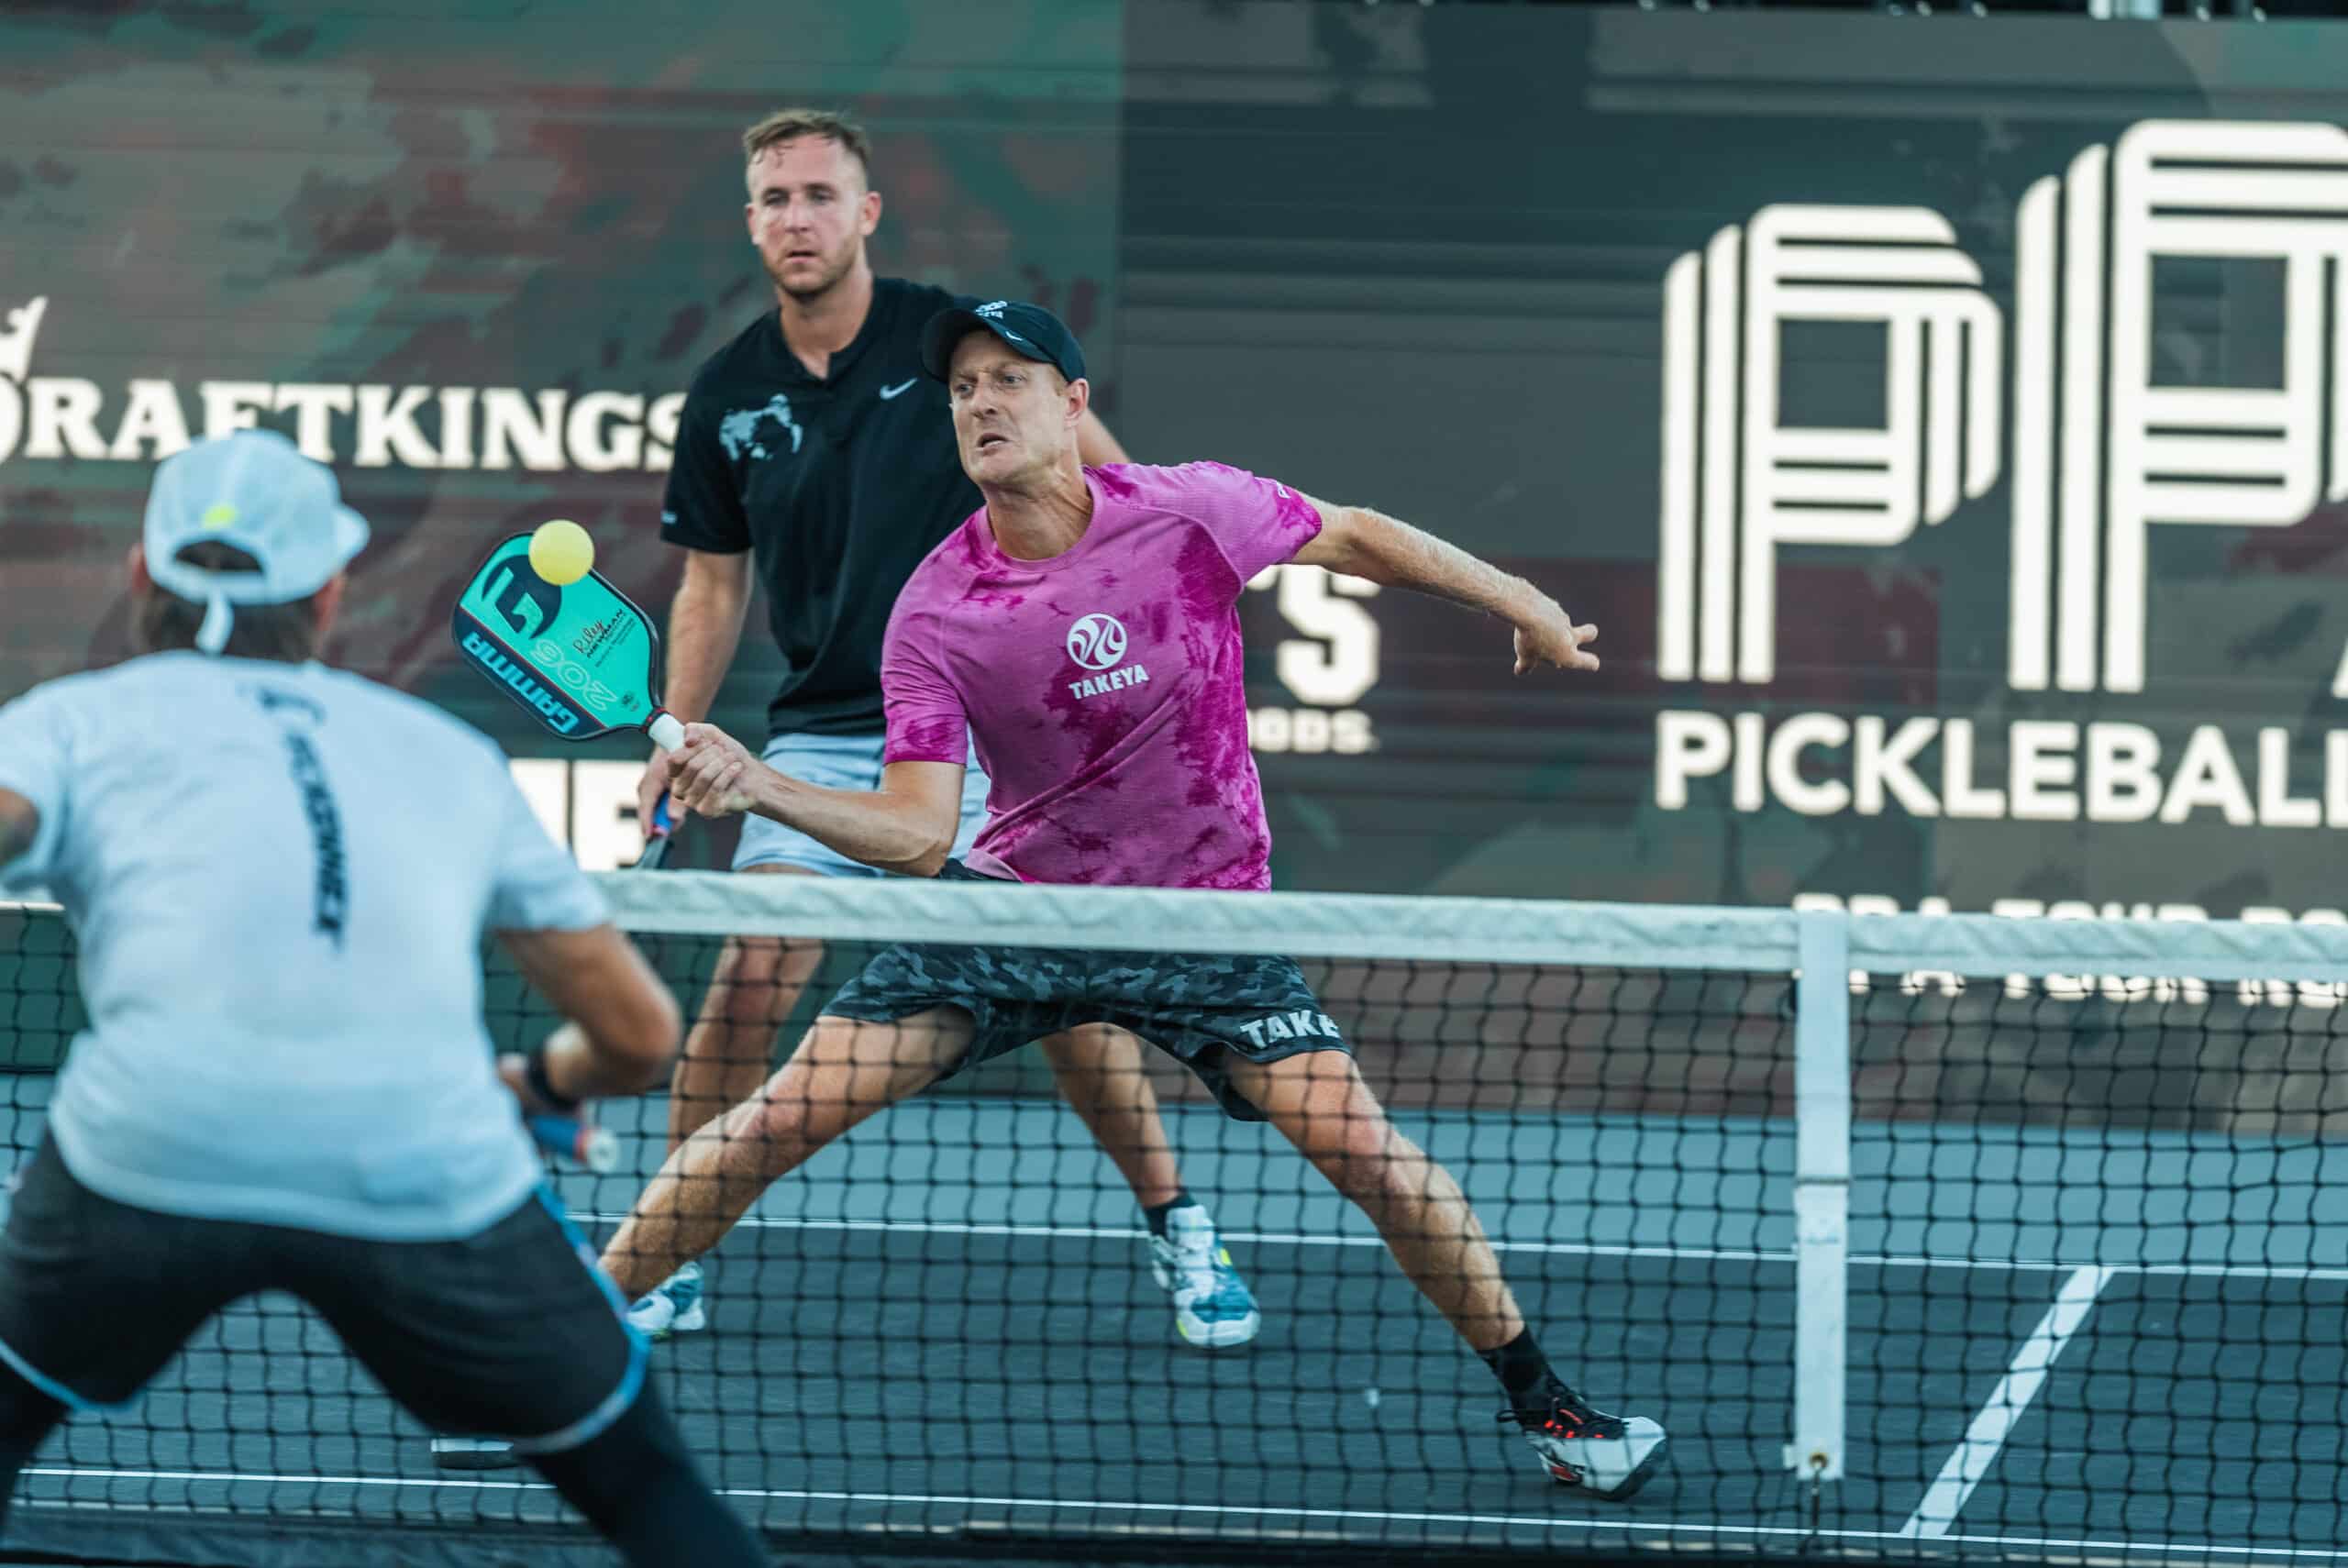 Preview to the PPA Tour RoundUp Professional Pickleball Association